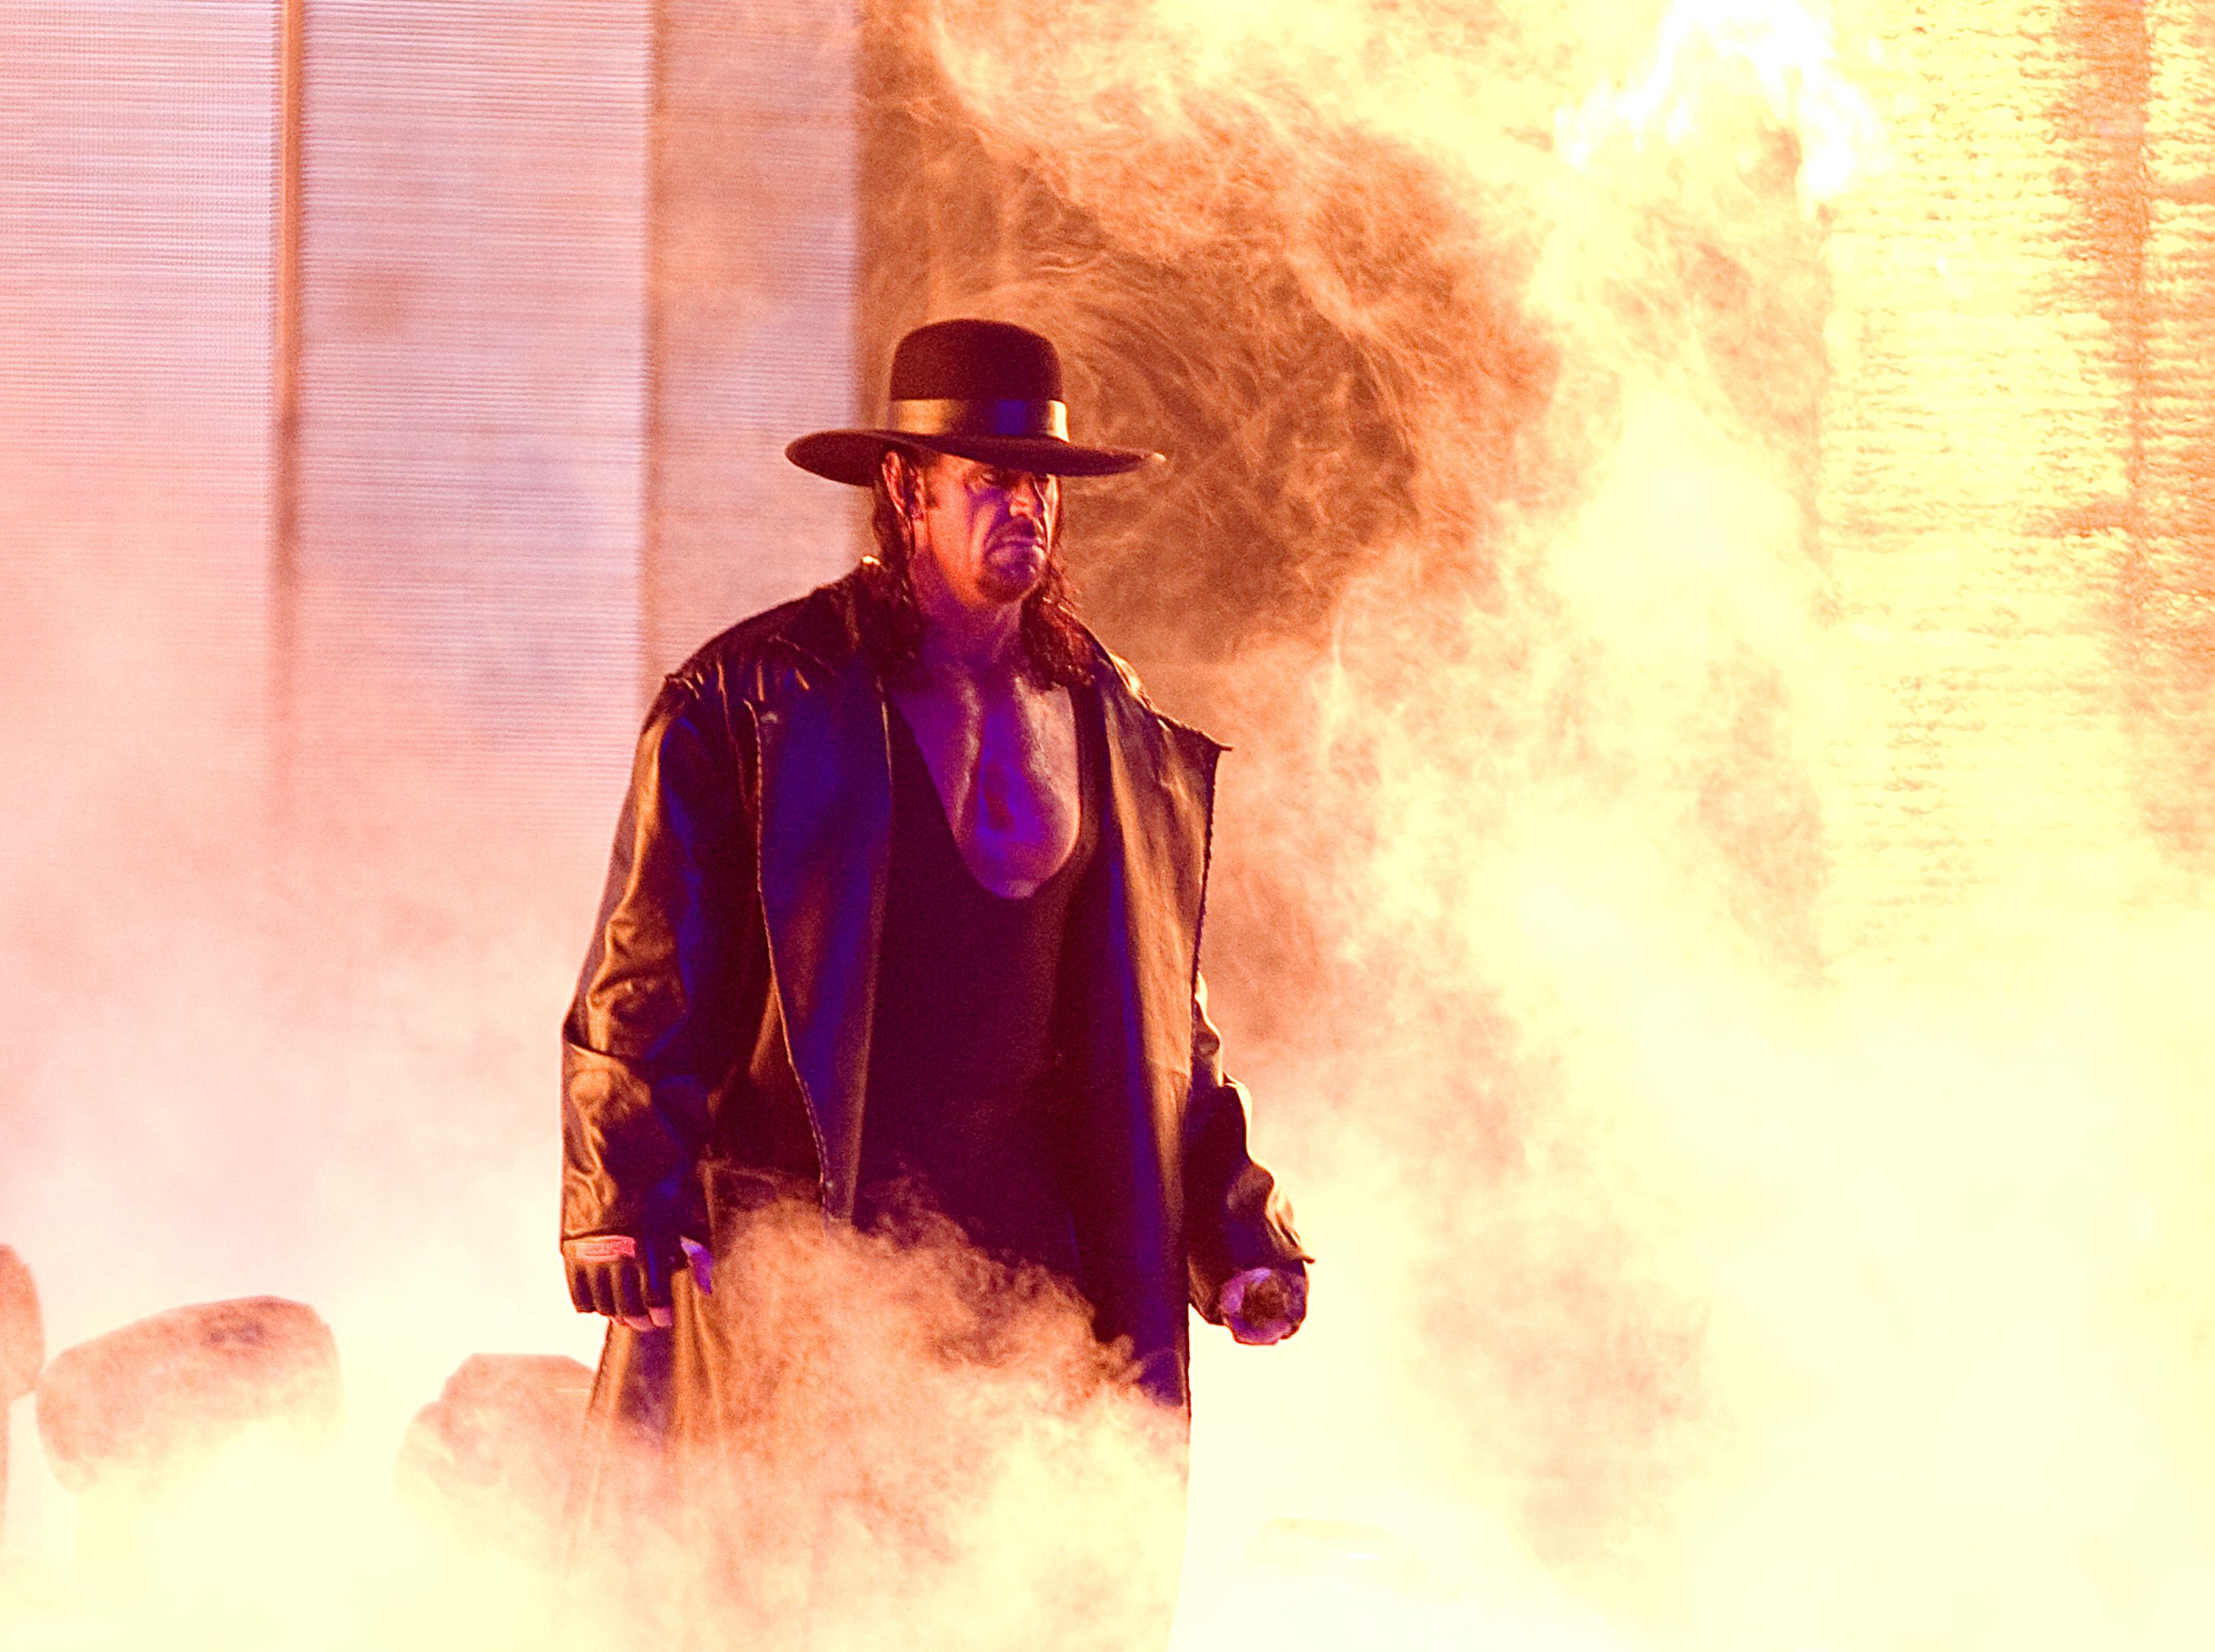 WWE star The Undertaker walks to the ring.